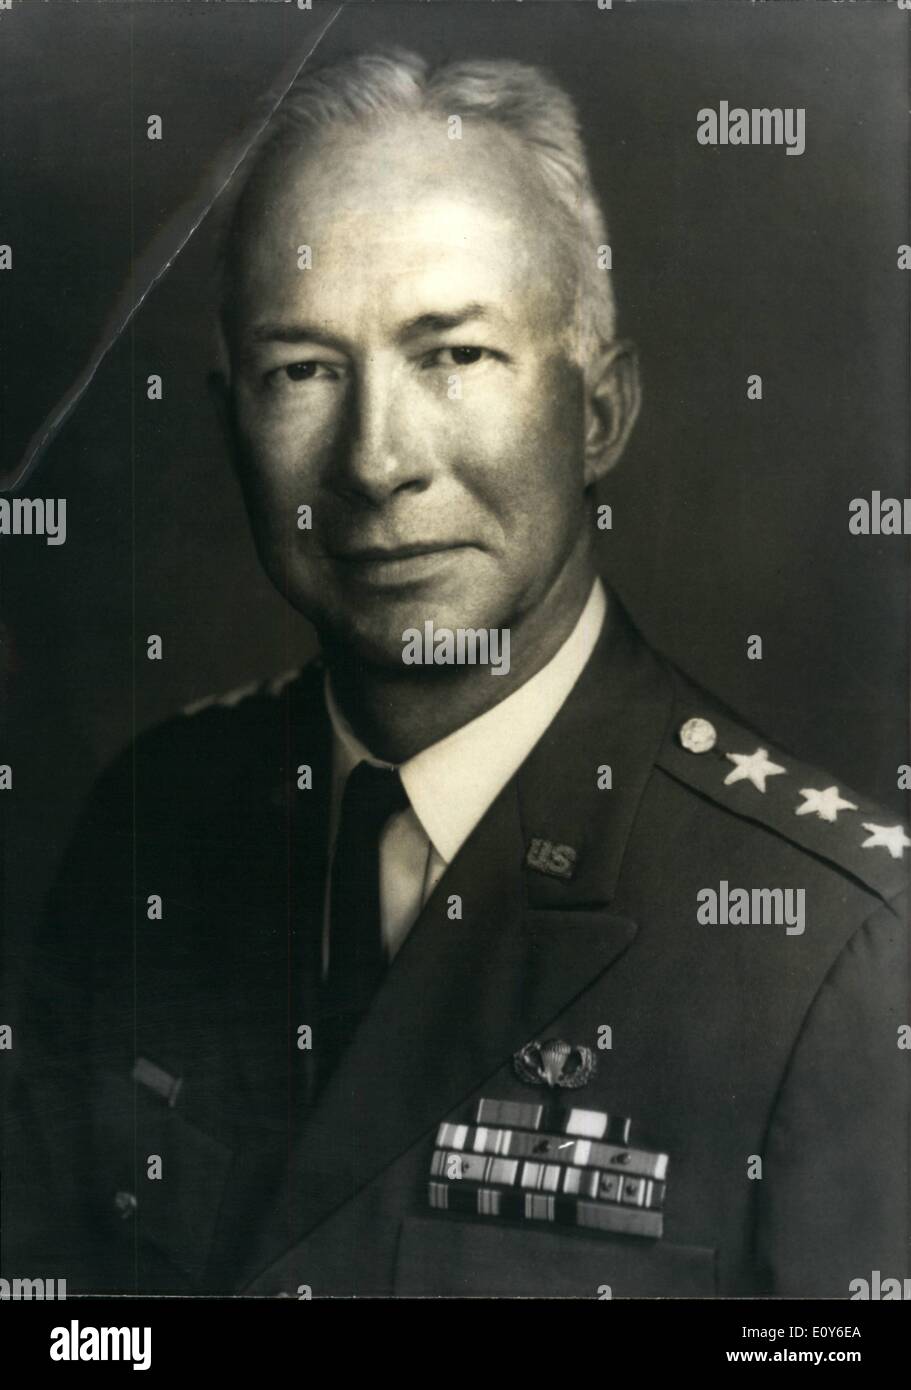 Mar. 03, 1969 - Shape: General Goodpaster takes over; General Andres Goodpaster, Commander in Chief of the American Forces in Vietnam will take over from General Lemnitzer as supreme commander of Allied Forces Europe on July 1st, 1969. Photo Shows A recent portrait of General Andrew Goodpaster, Stock Photo